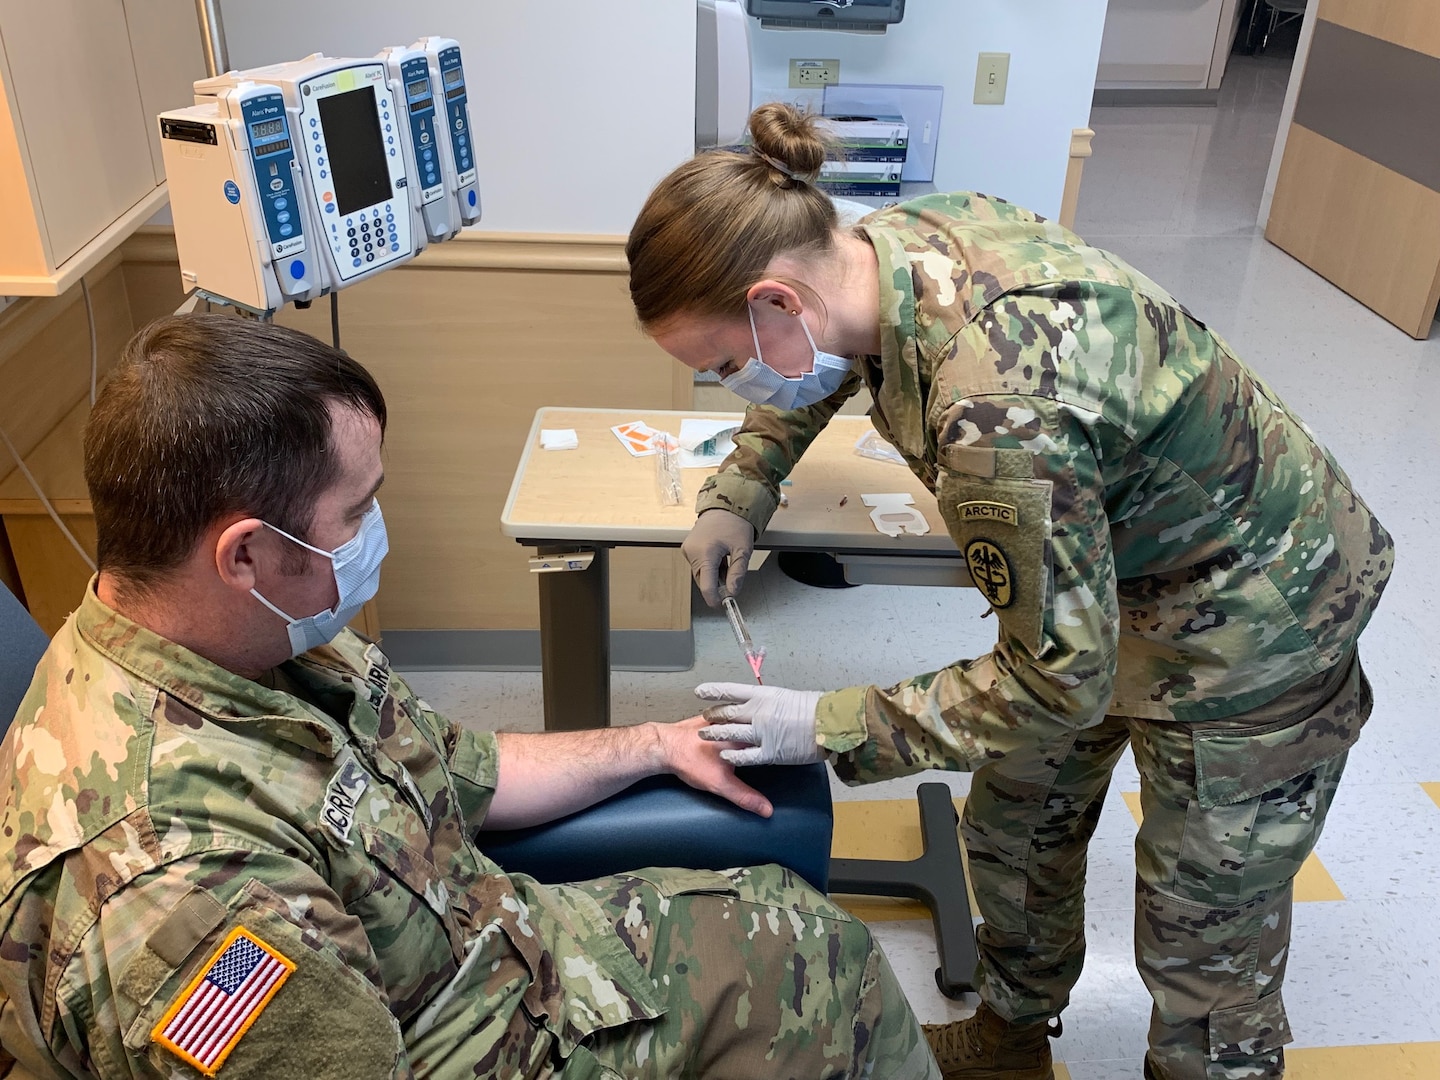 Female and male soldier in uniform. Female soldier starting an IV on the male soldier sitting down.